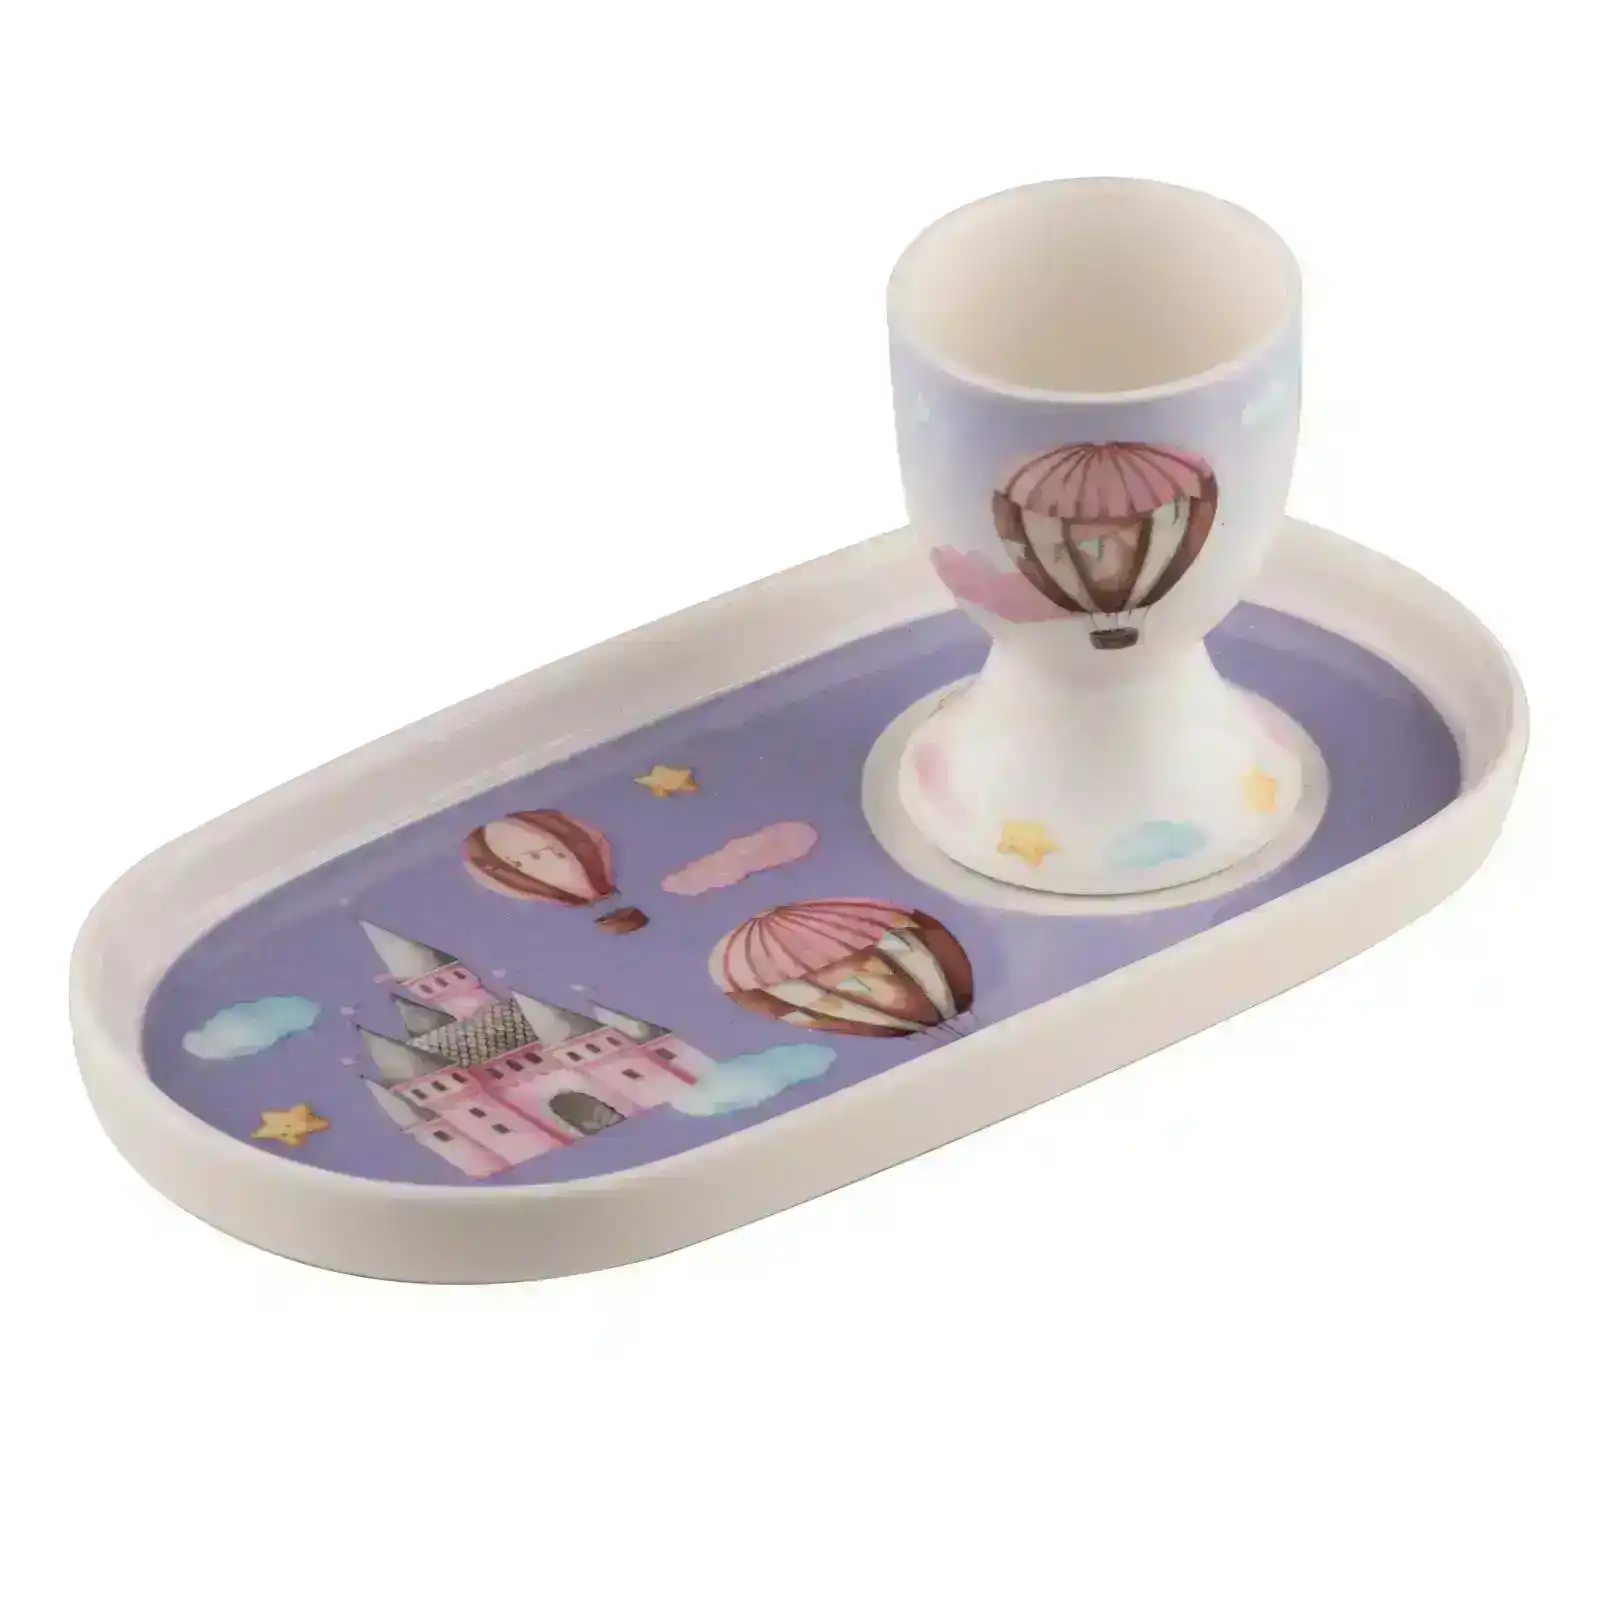 Ashdene Up In The Sky Soldier Kids New Bone China Egg Cup/Snack/Dinner Plate Set